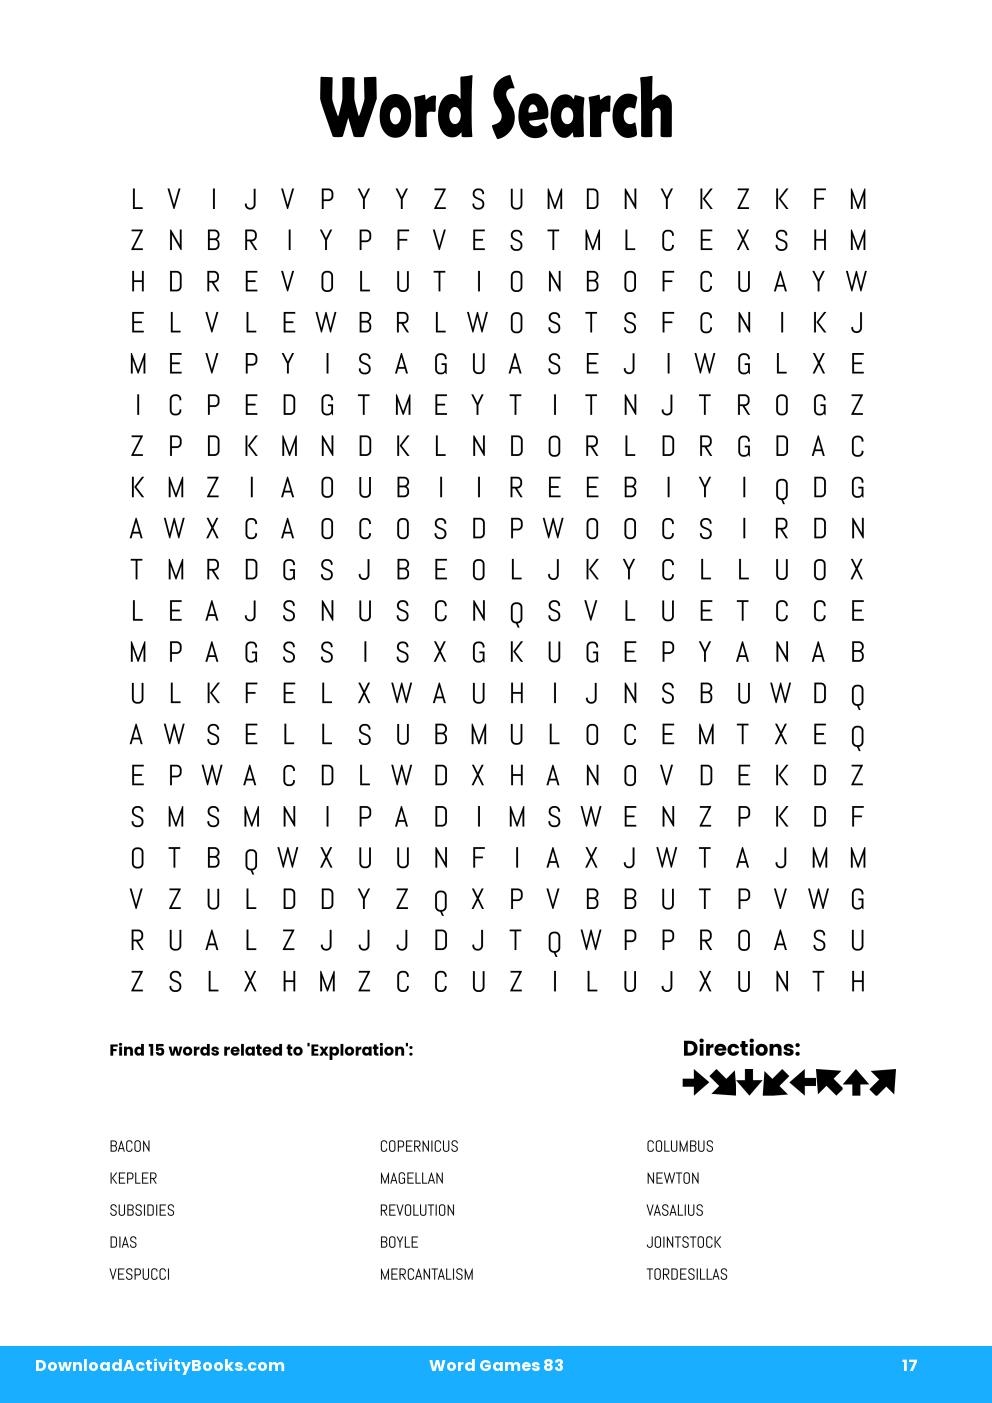 Word Search in Word Games 83